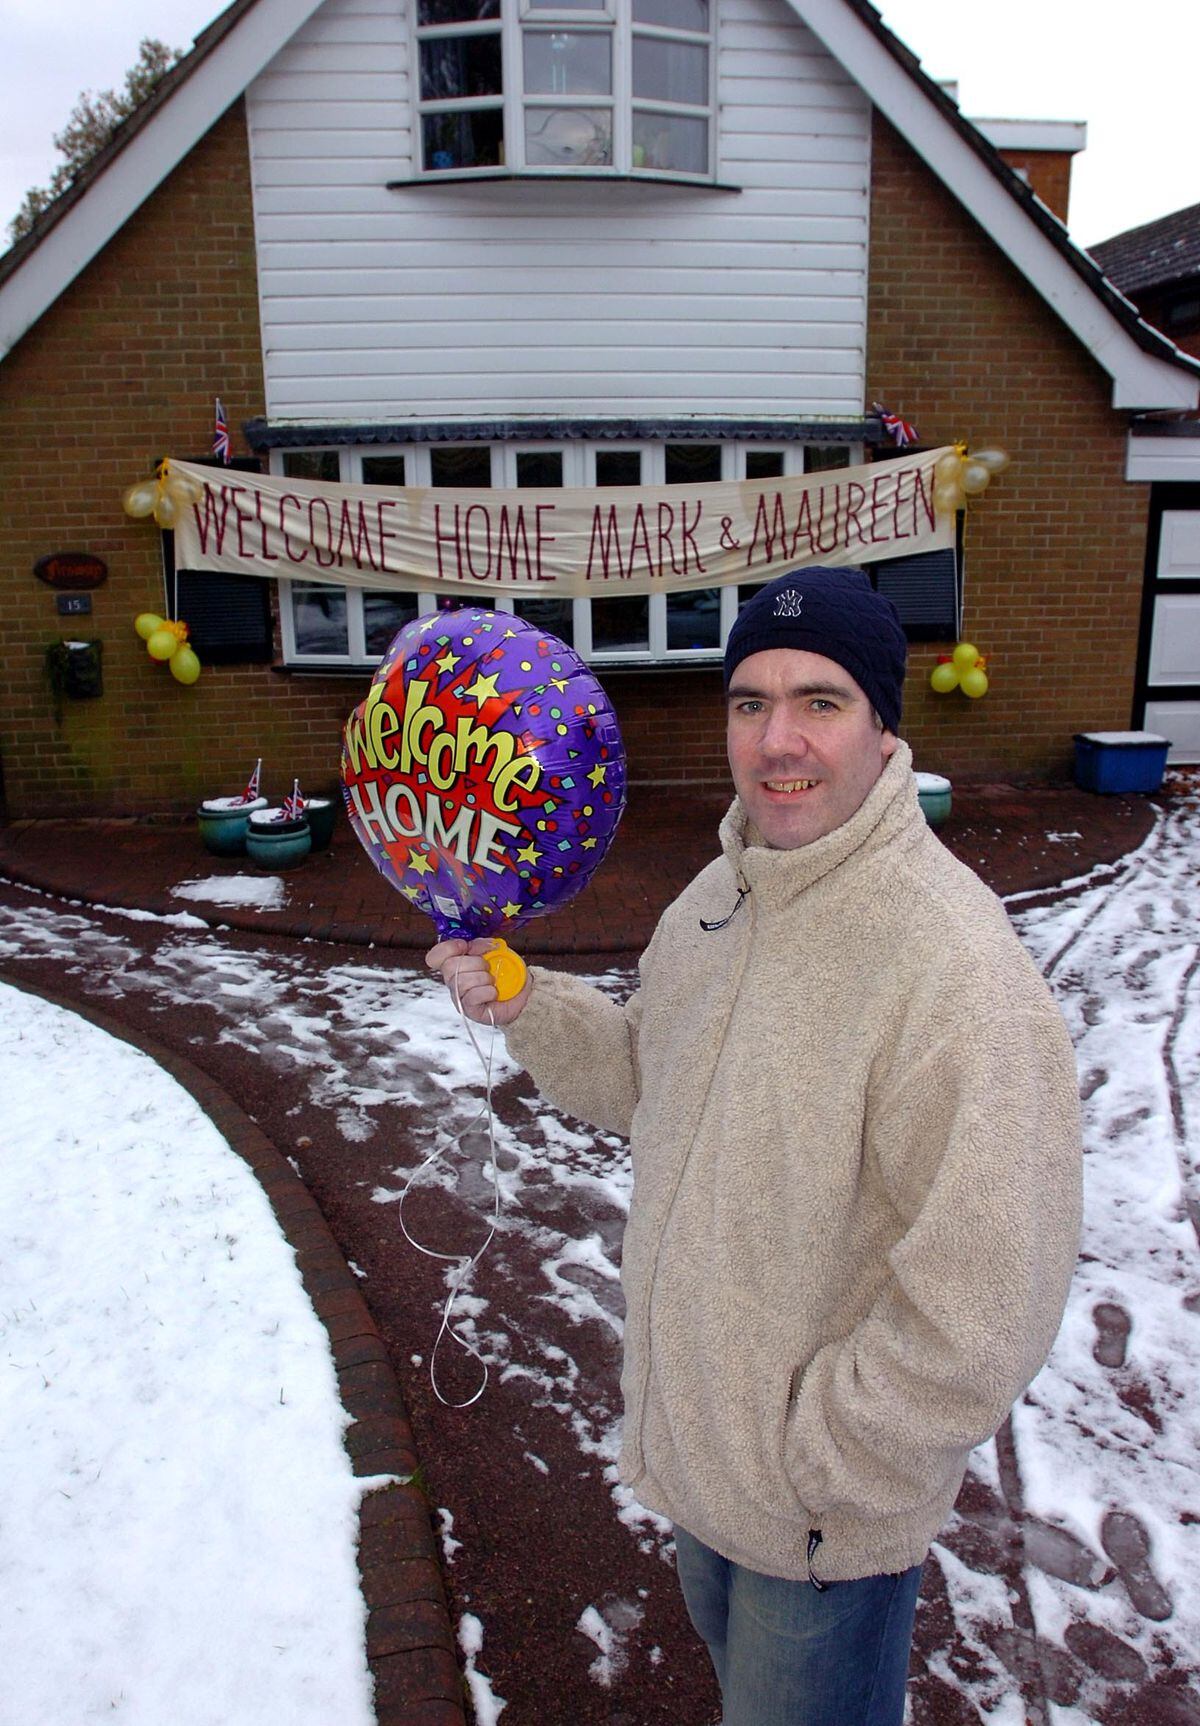 Mark Allen arrived home to a house decorated by his neighbours in Cannock Wood after his double lung transplant.